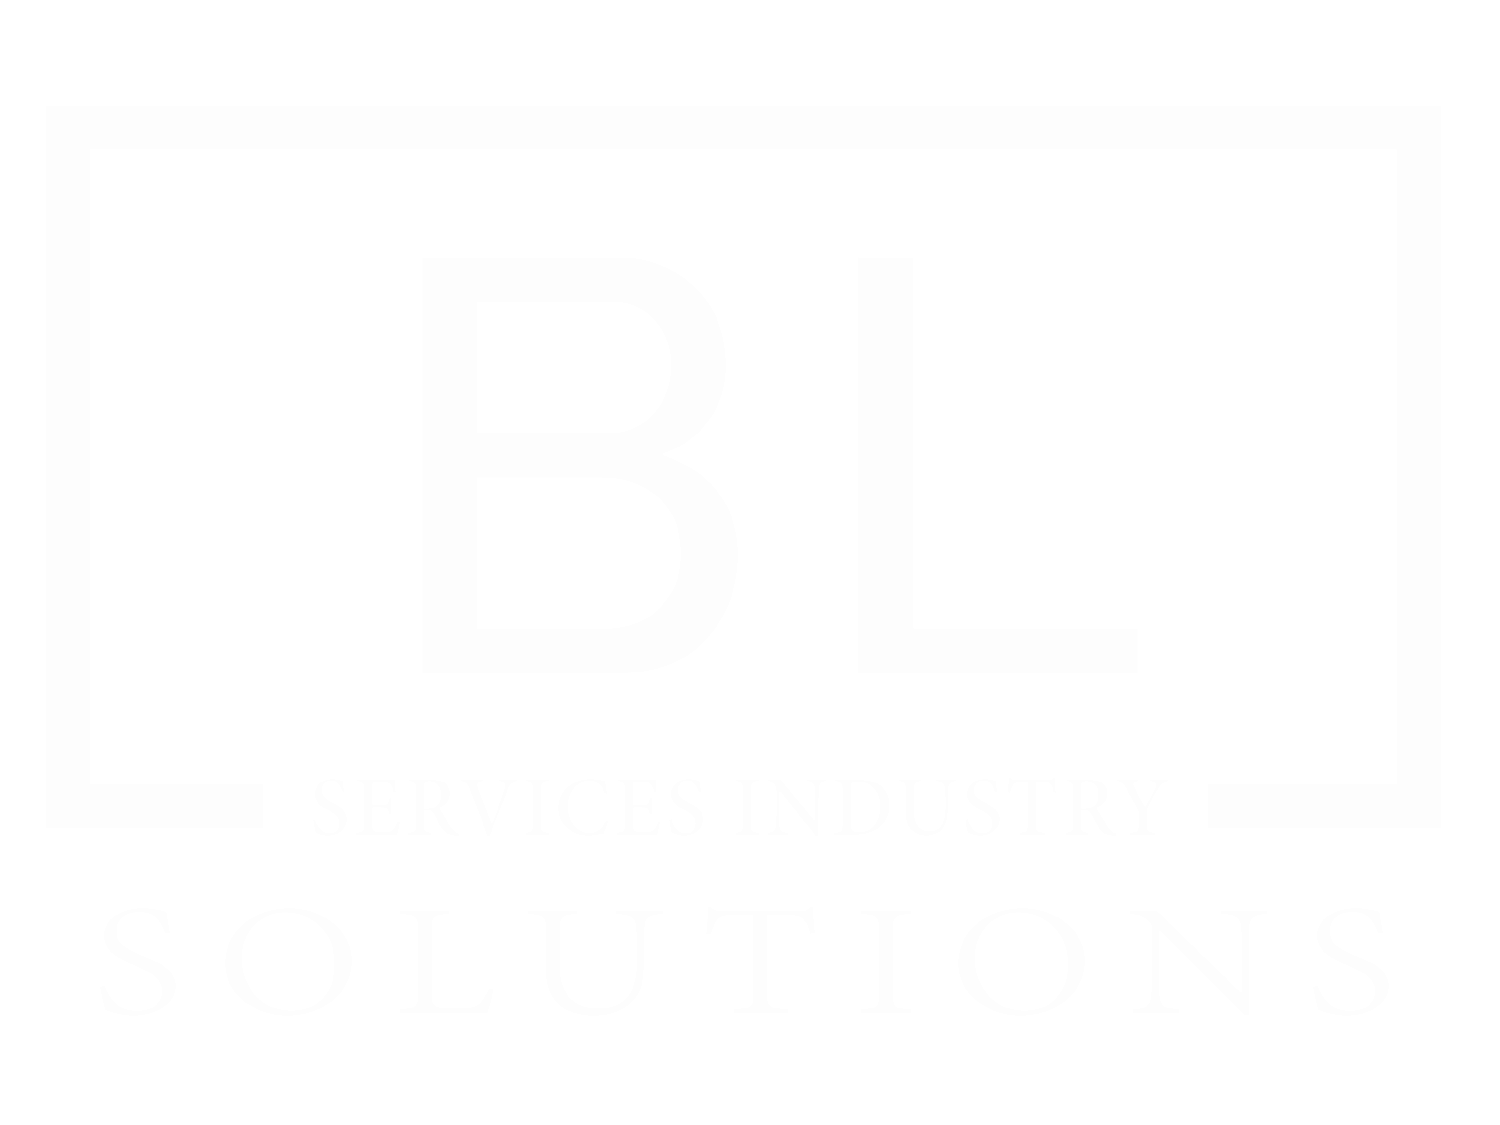 BL Services Industry Solutions